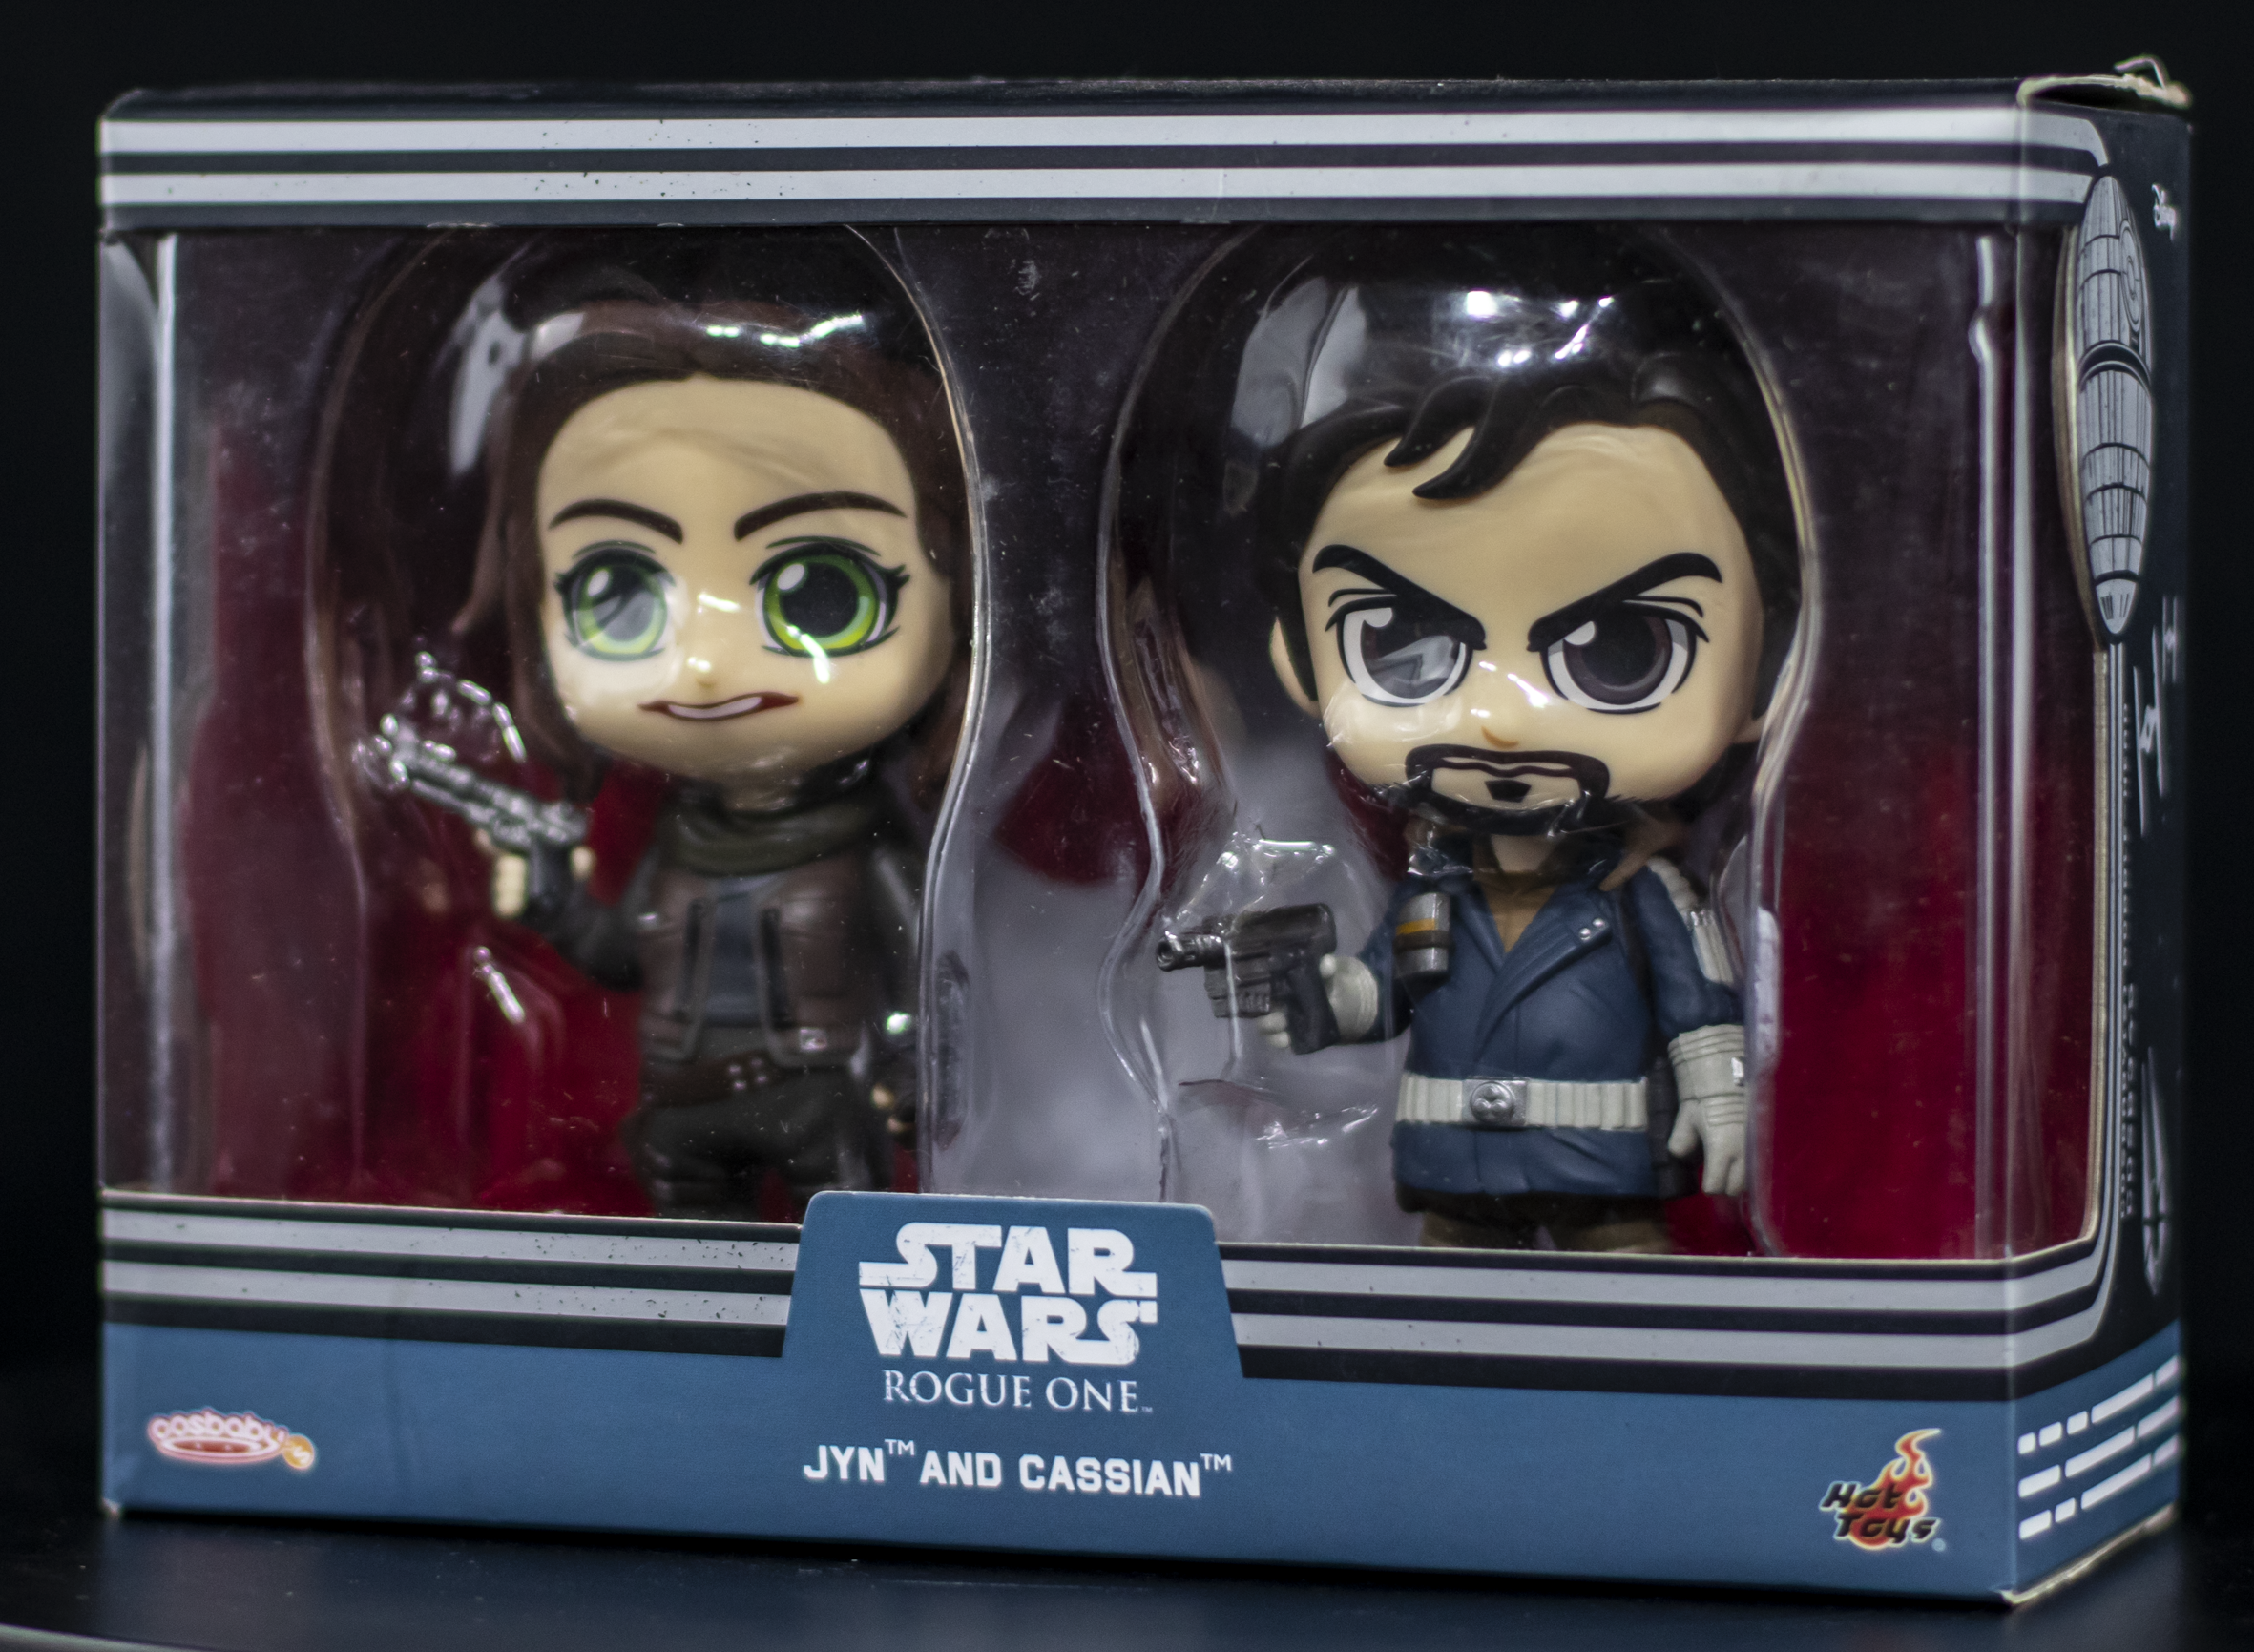 Star Wars: Rogue One "Jyn And Cassian" Hot Toys